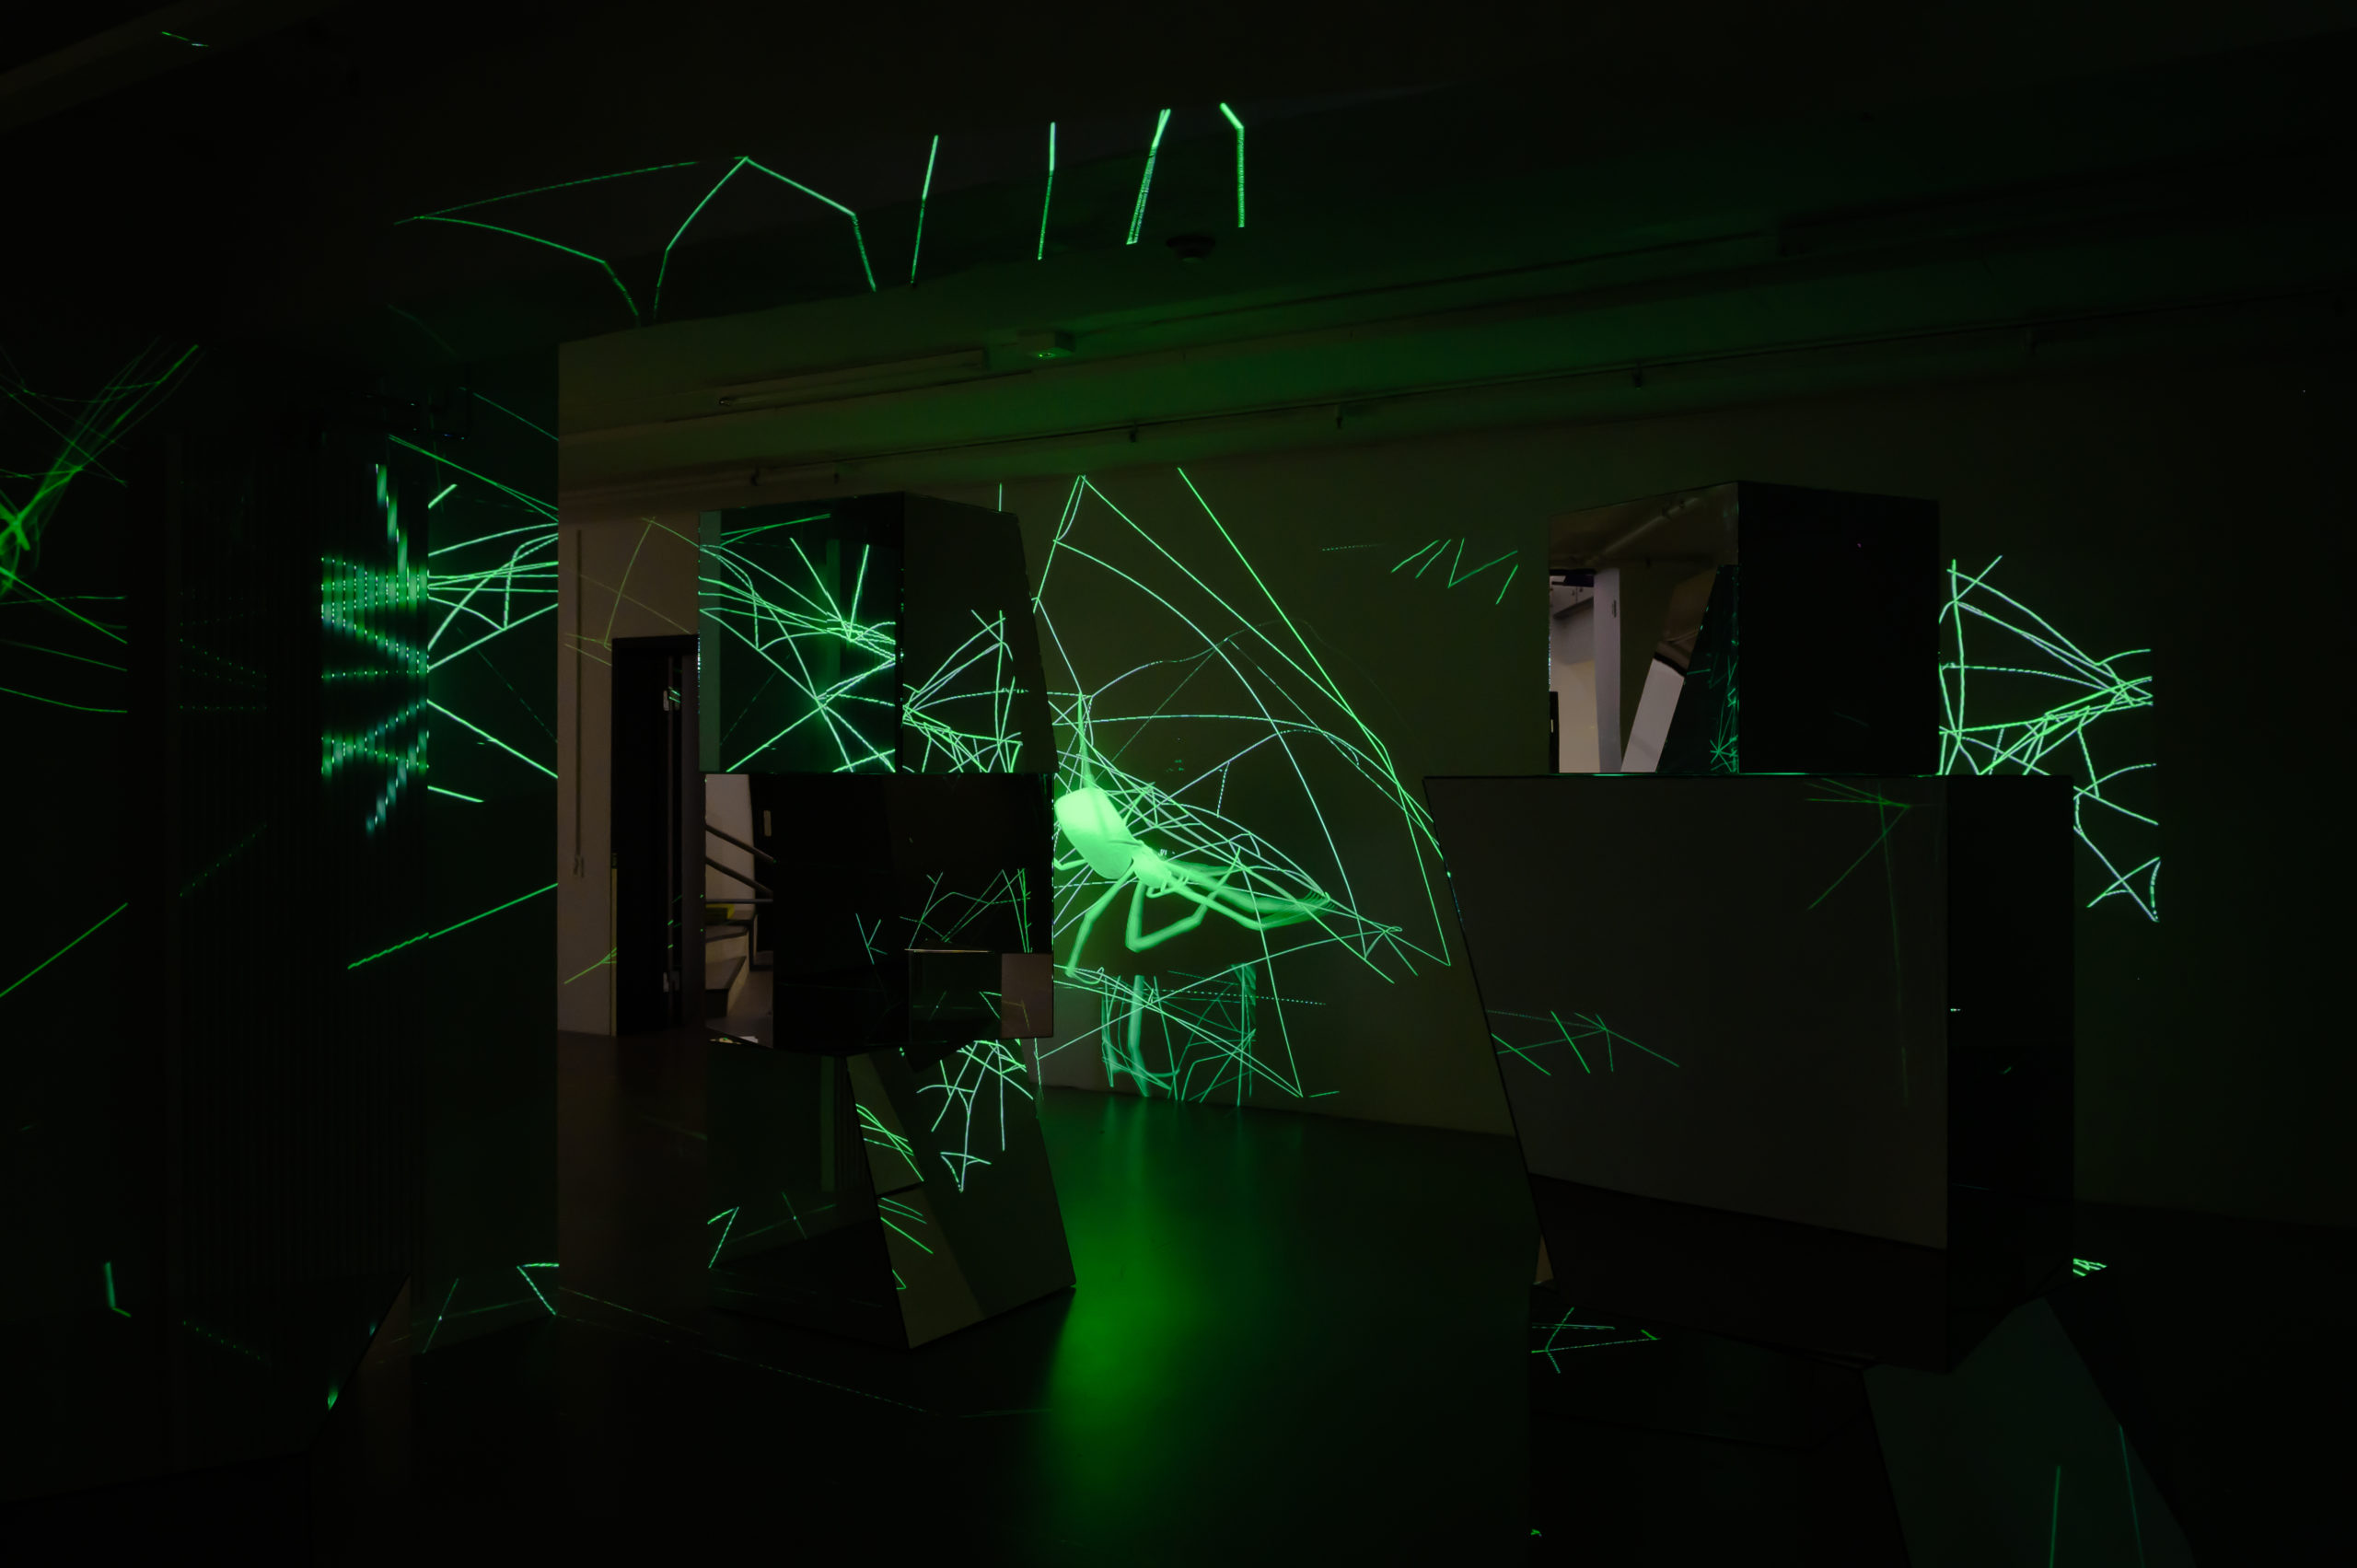 Ann Lislegaard, Spinning and Weaving Ada (2016), 3D animation, 12 mirror sculptures, each 70 x 70 x 80 cm. Courtesy the artist. Photo: Daniel Vincent Hansen. In the exhibition Unweaving the binary code at Kunsthall Trondheim as part of the 3rd Hannah Ryggen Triennale, 2022.